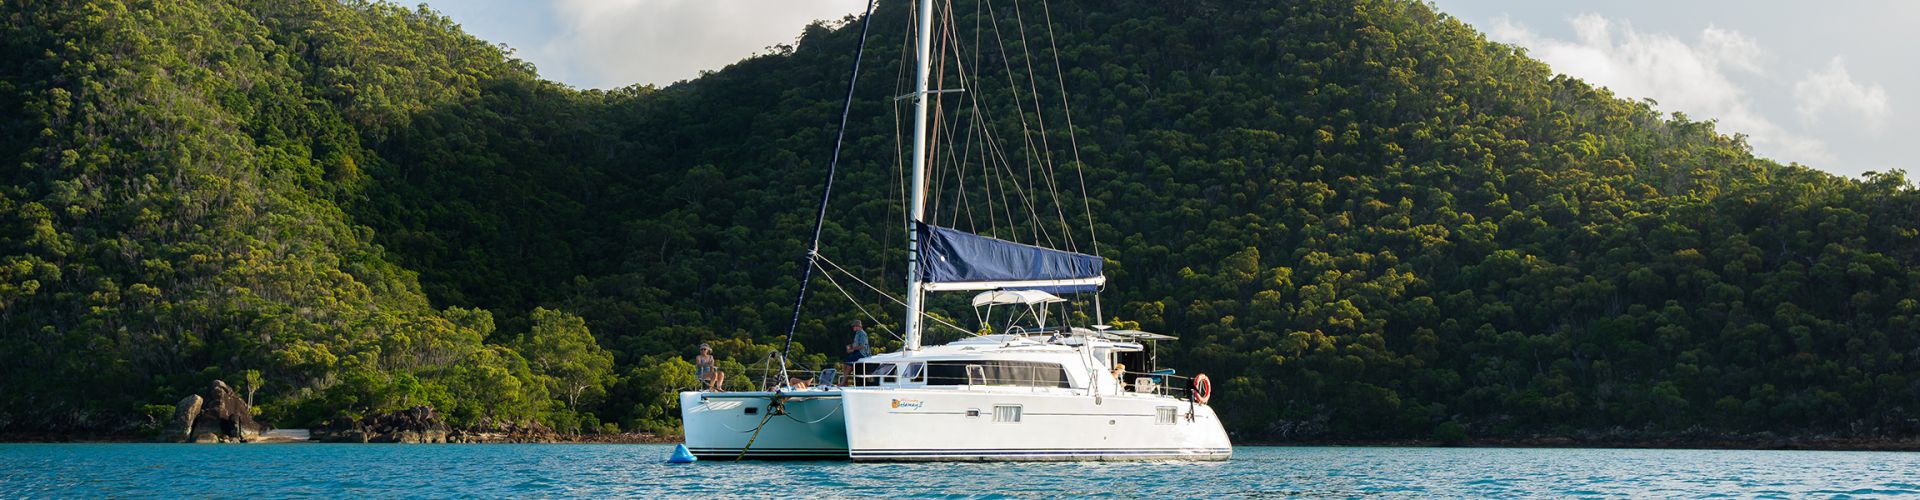 Private Overnight Charters from Airlie Beach - Sailing Whitsunday Image